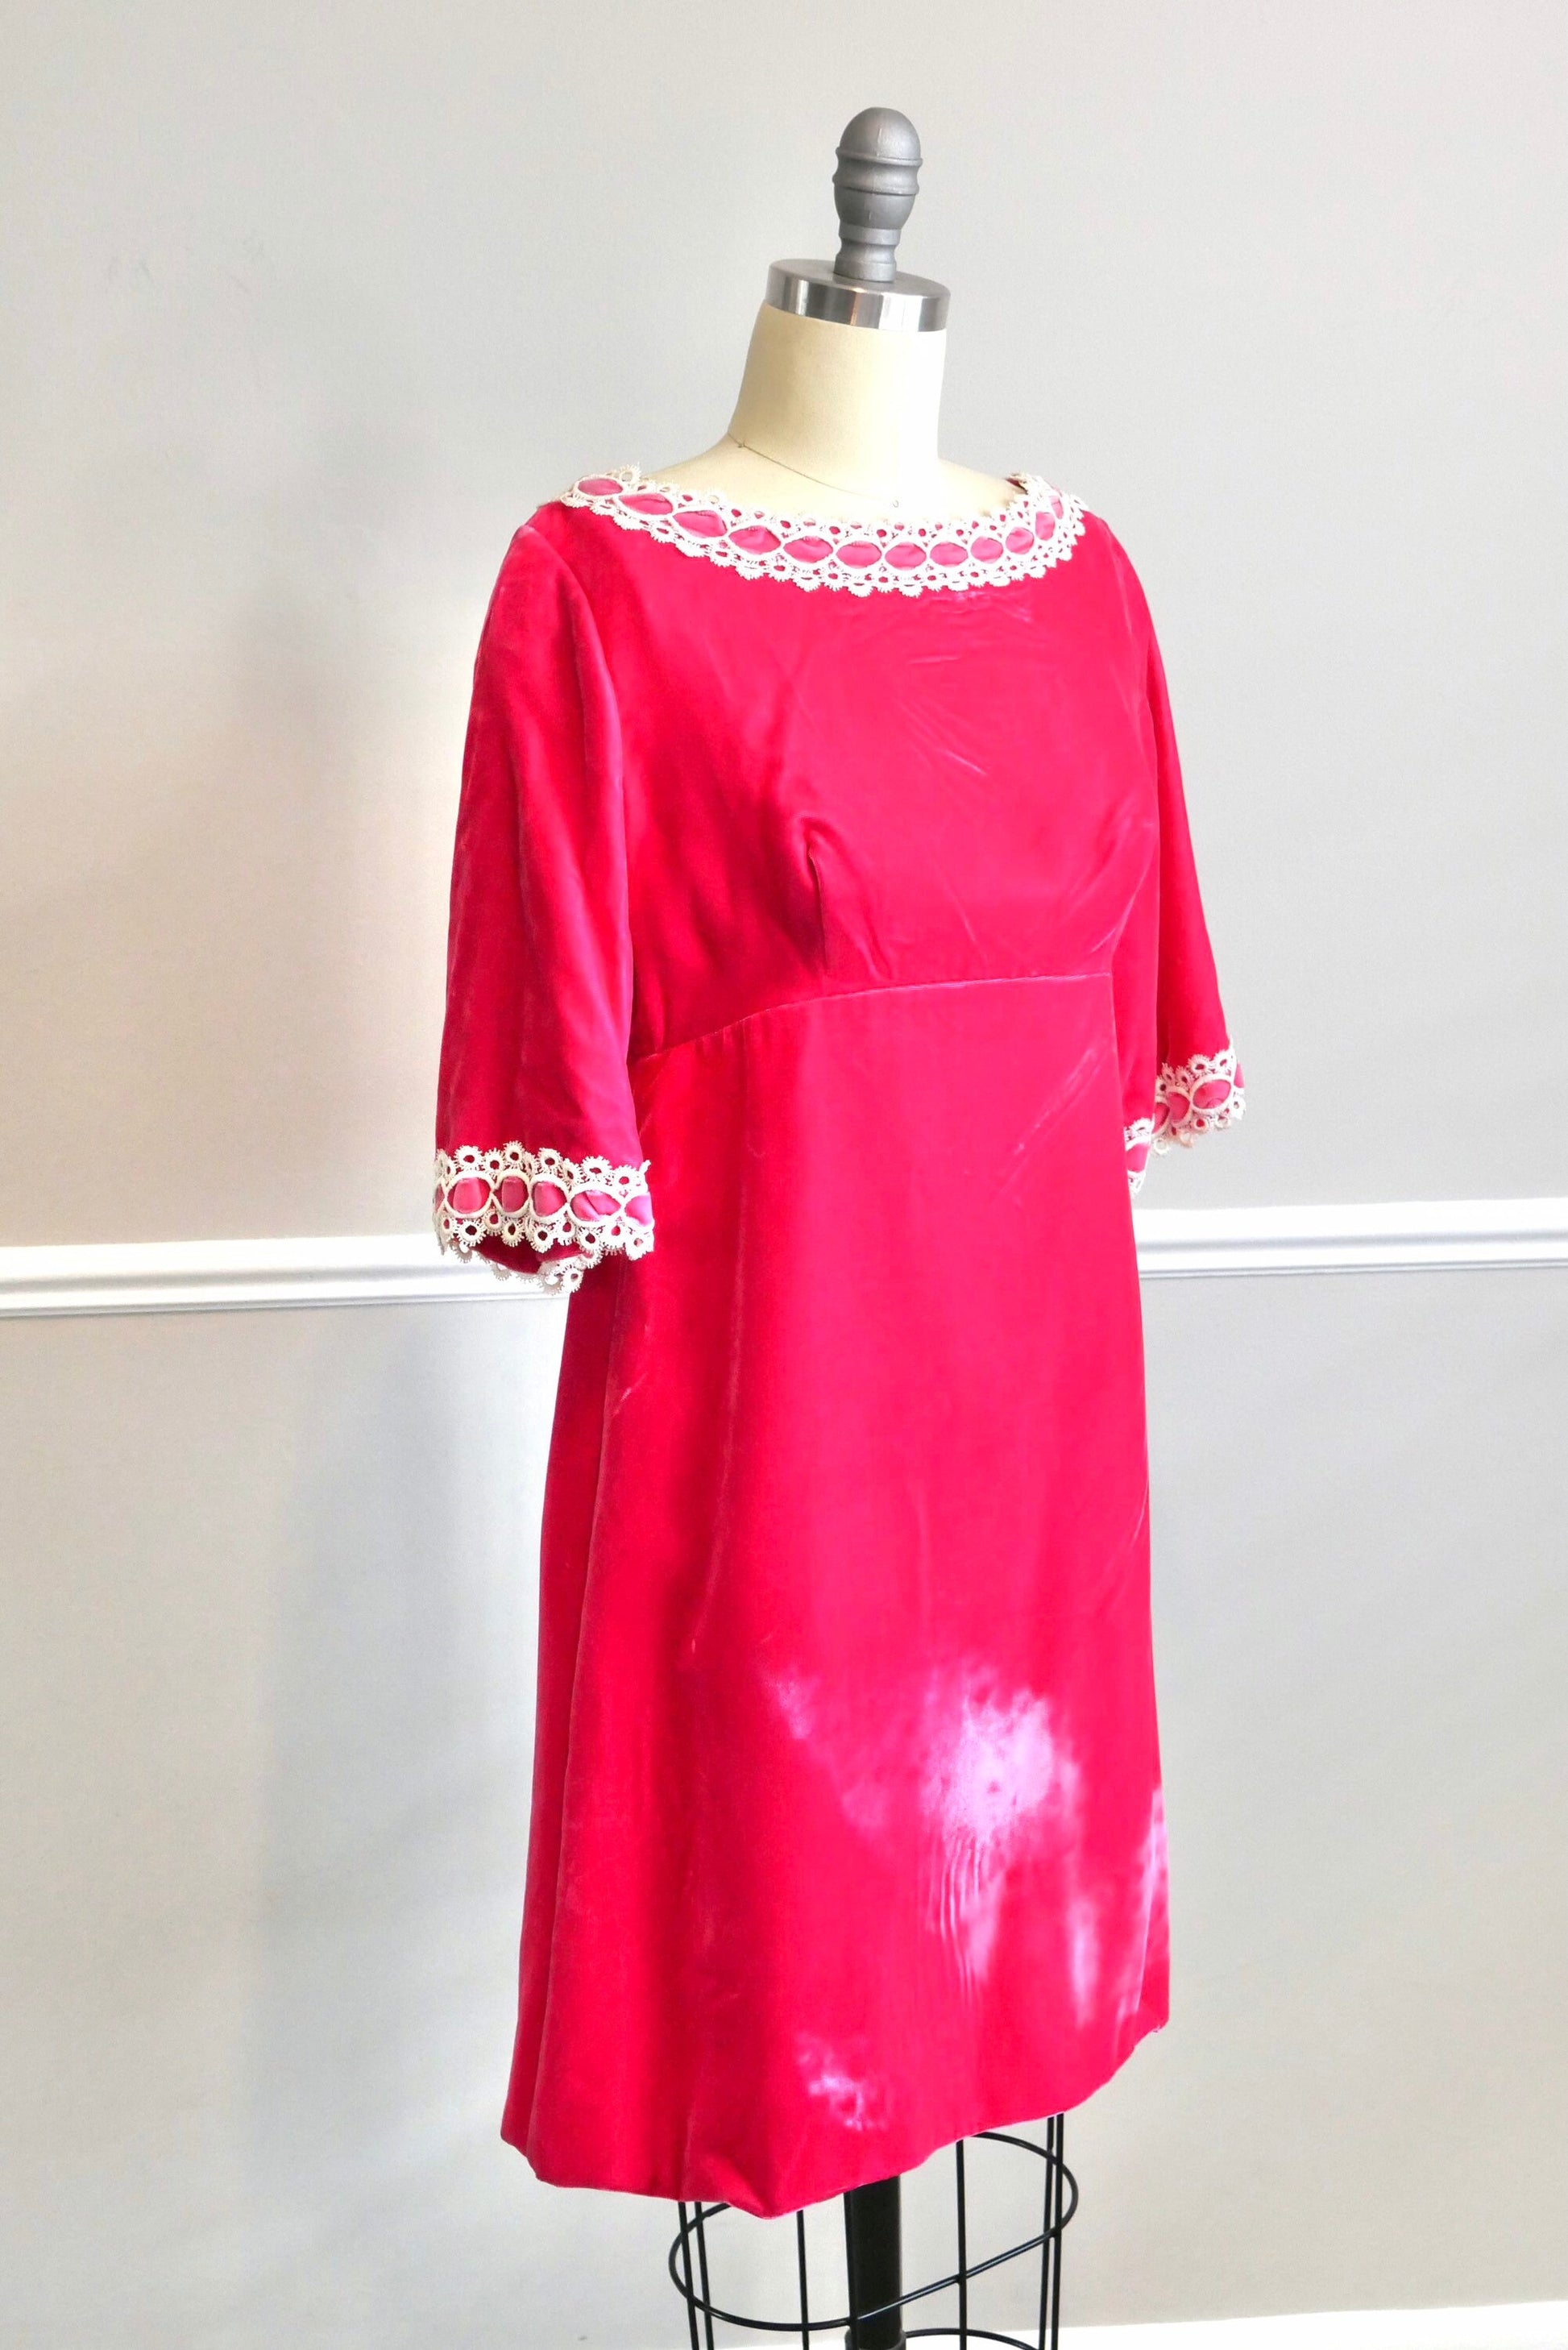 Vintage late 1960s Hot Pink Velvet Mini Dress / retro babydoll empire waist party holiday scooter dress size XS S